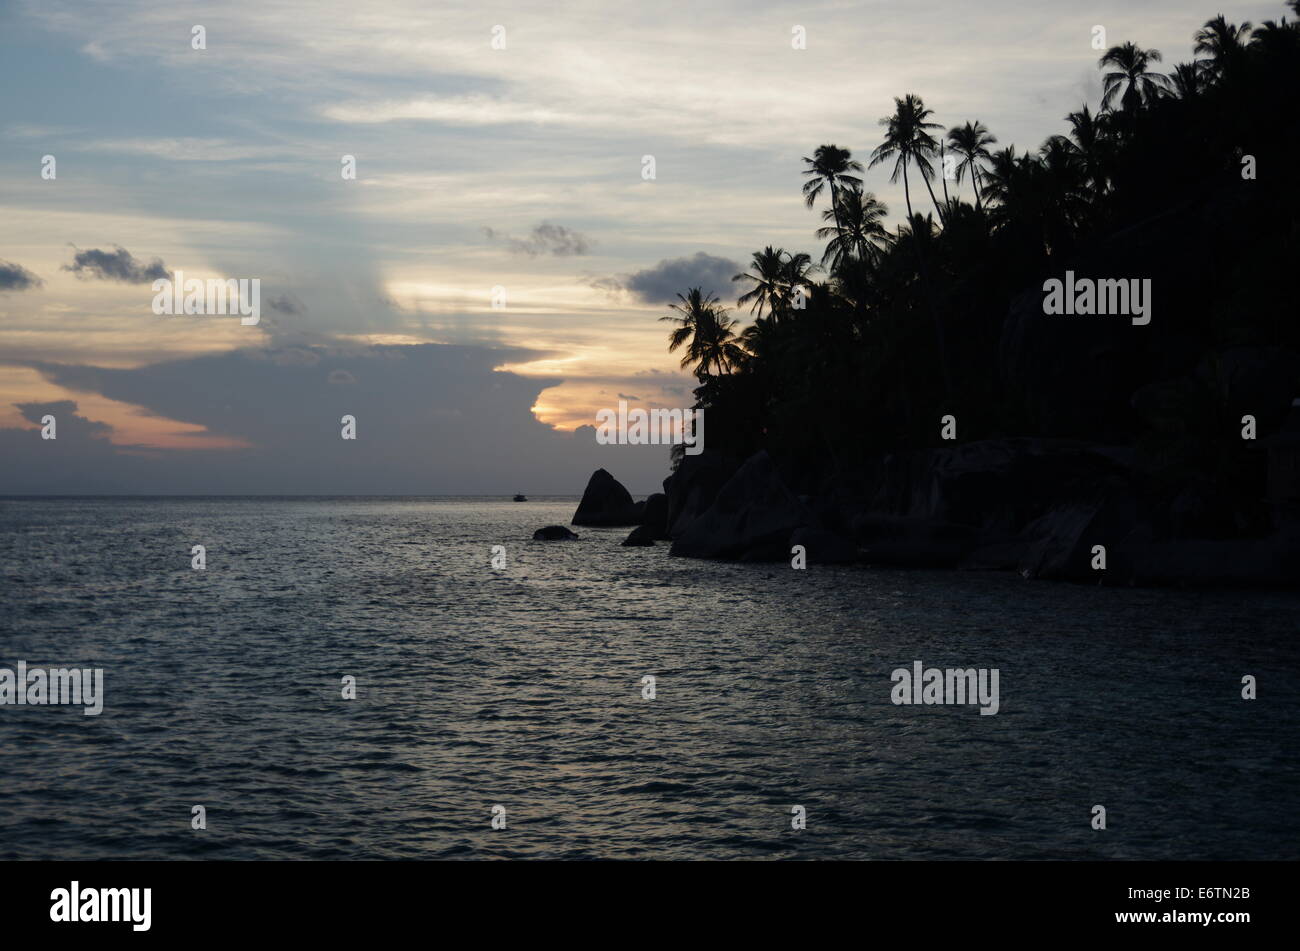 Sunset on the sea and an island in the dark. Stock Photo